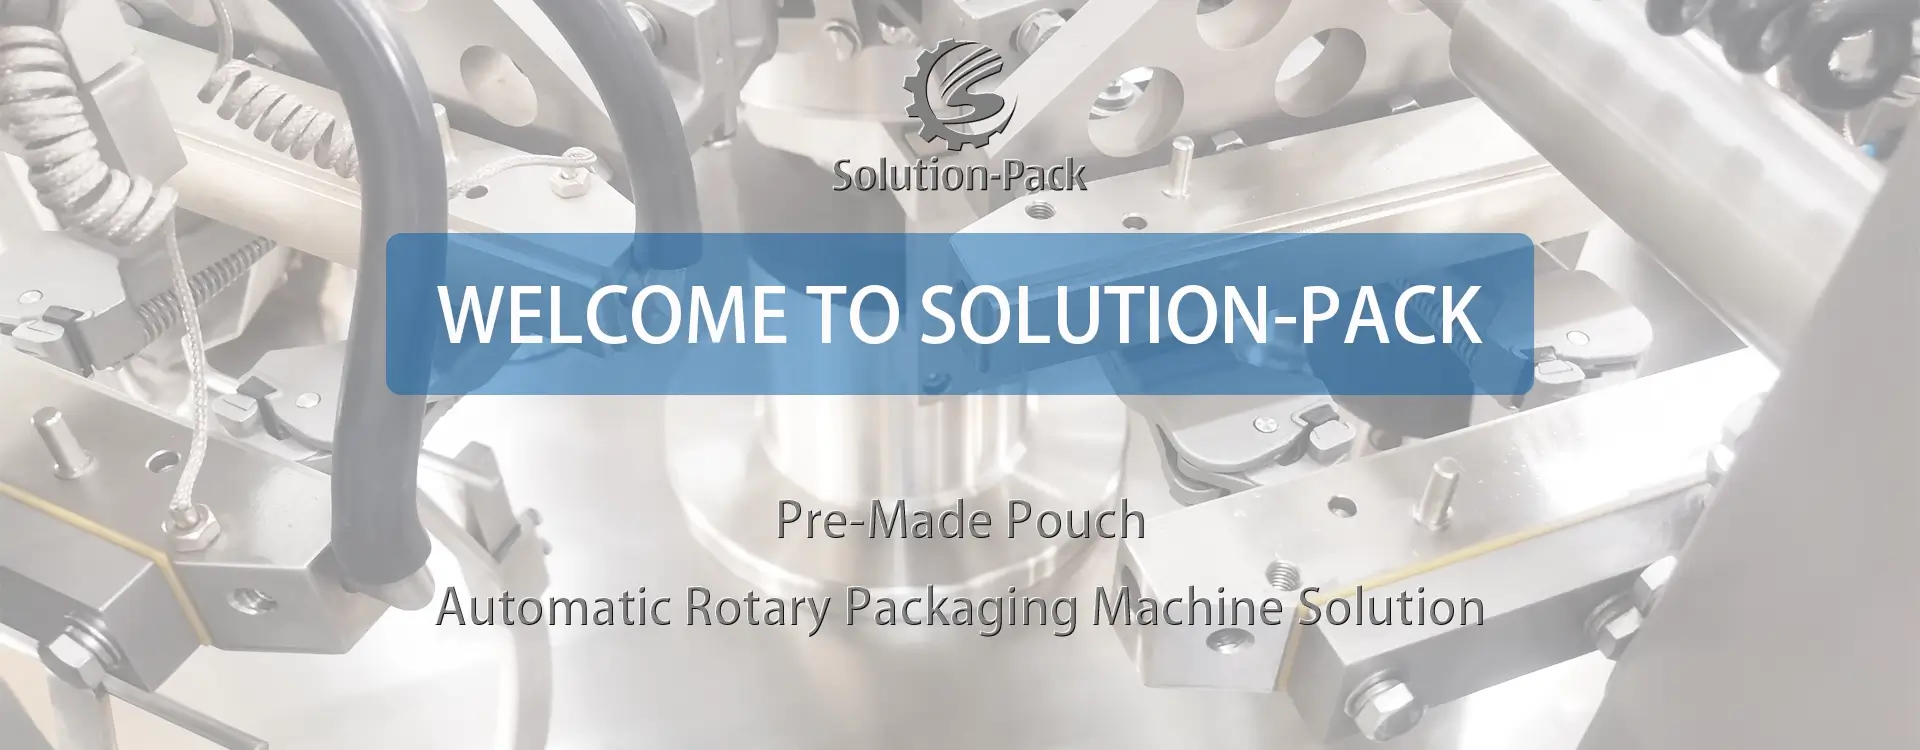 Model SP8-240G Automatic Granule Rotary Packaging Machine Solution Bottom Banner Picture | Solution-Pack